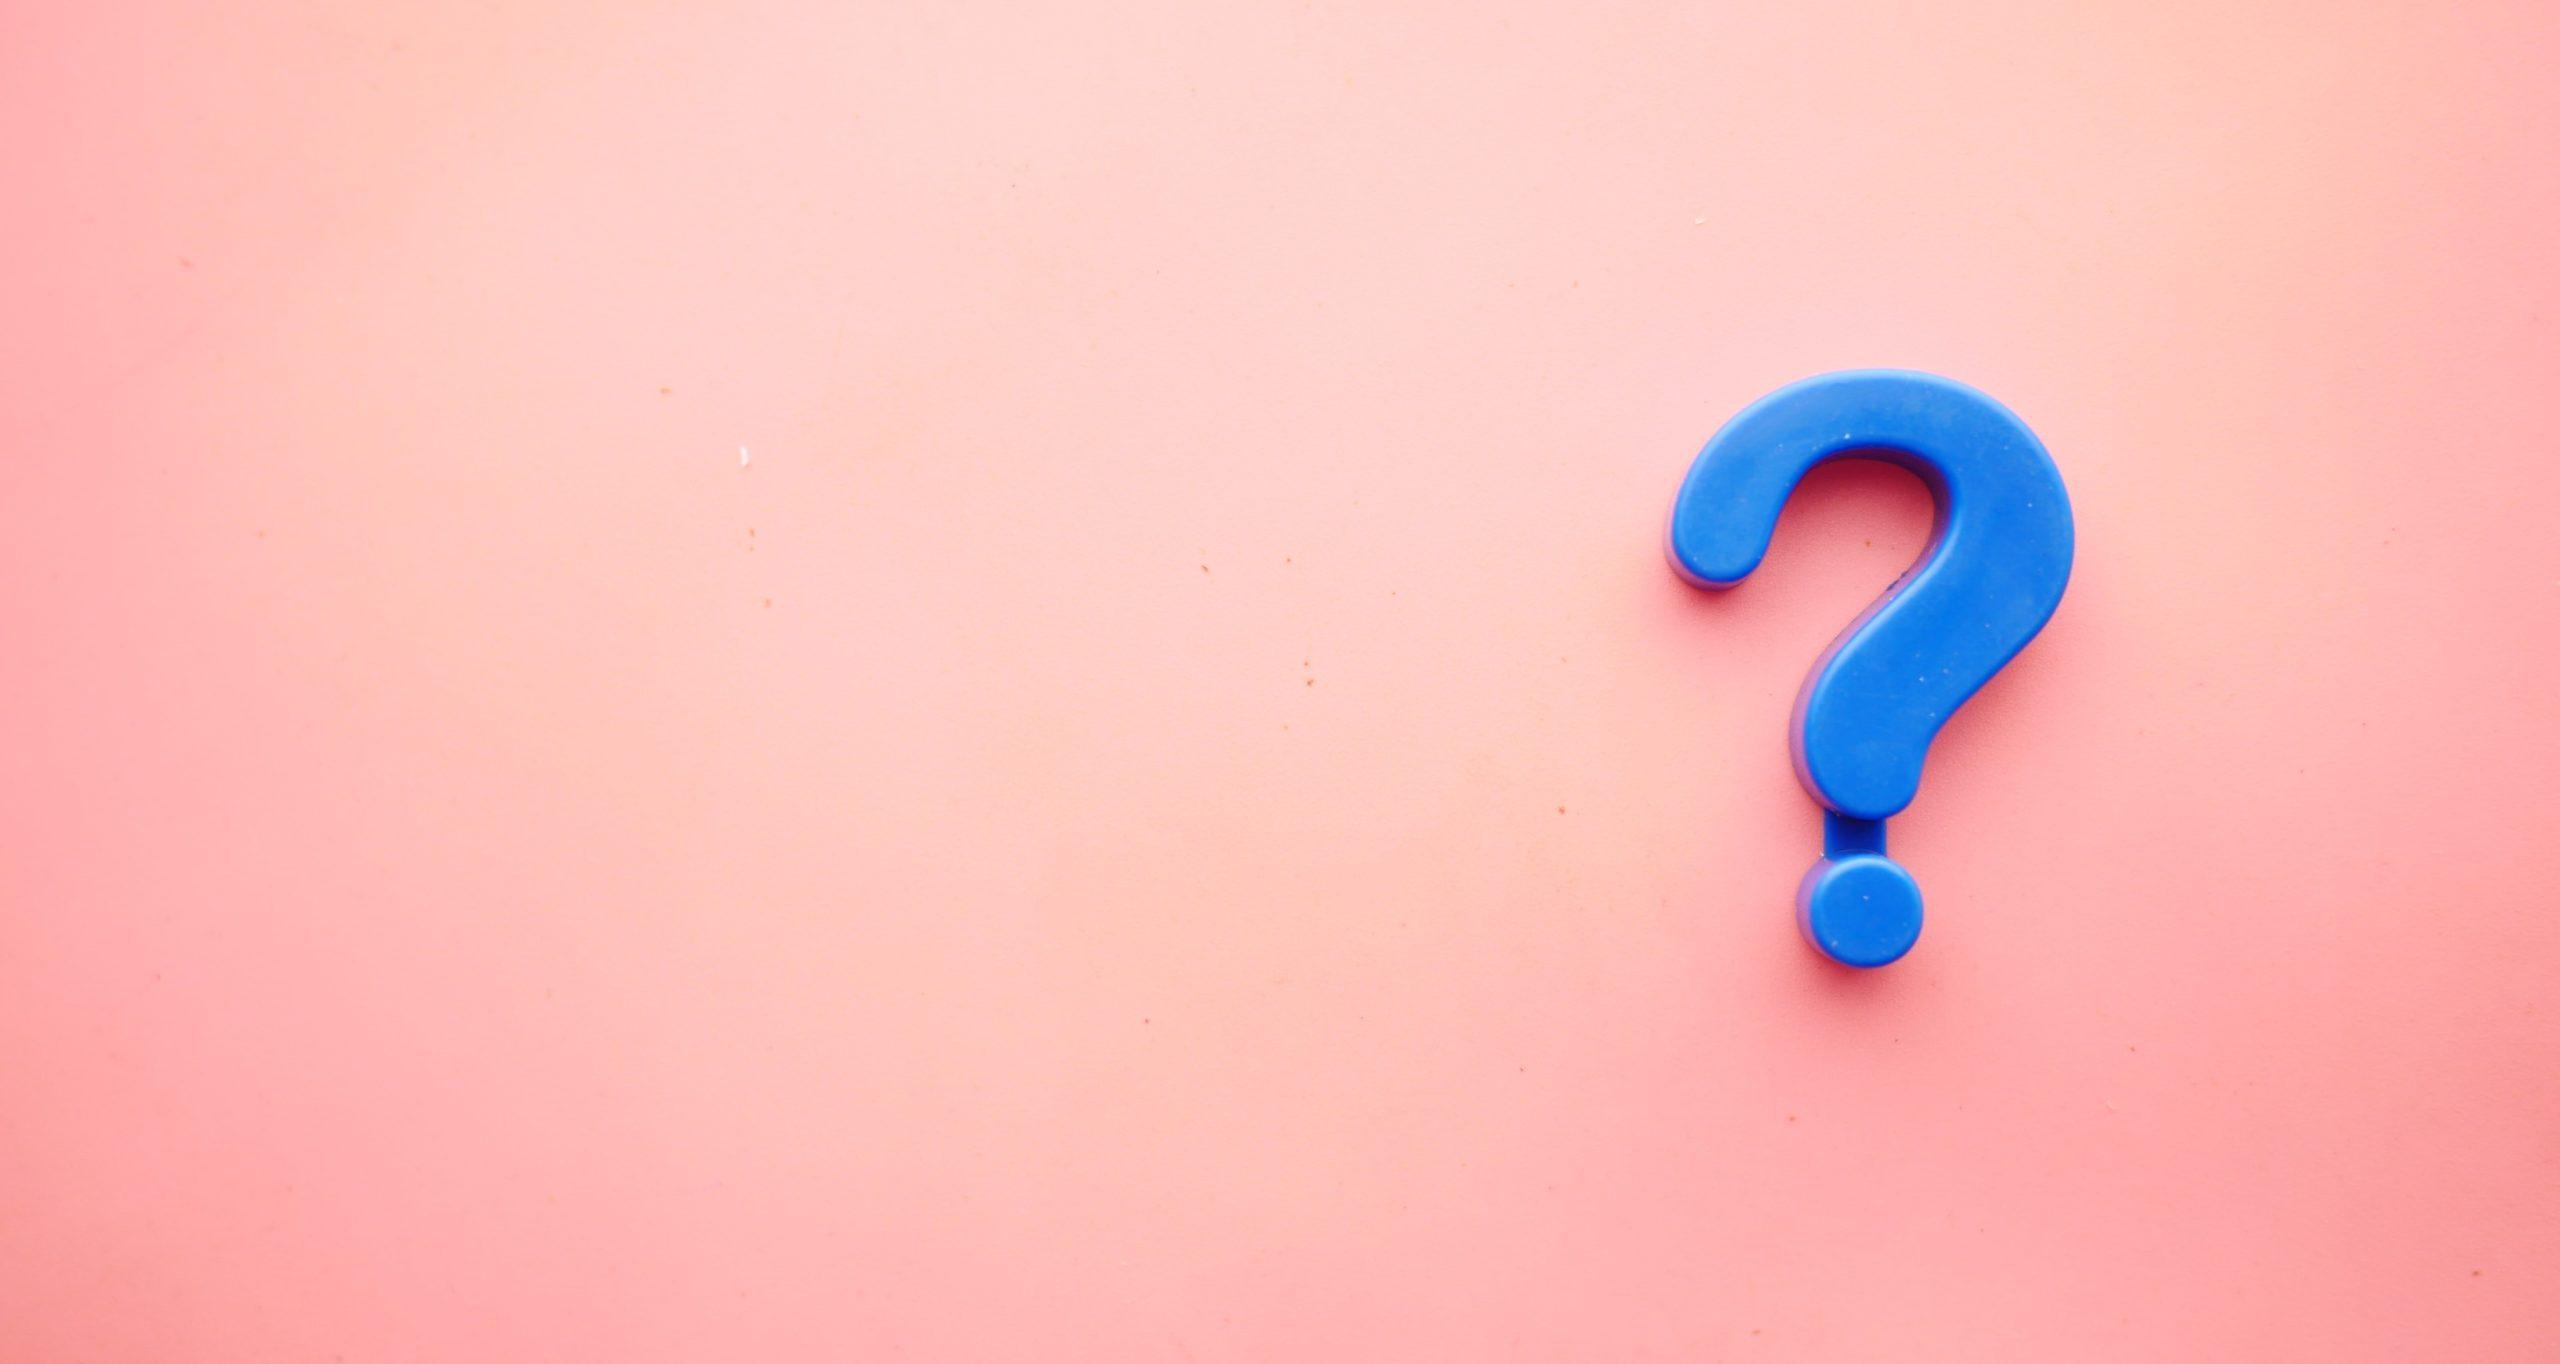 A blue-coloured question mark against a pinkish background.